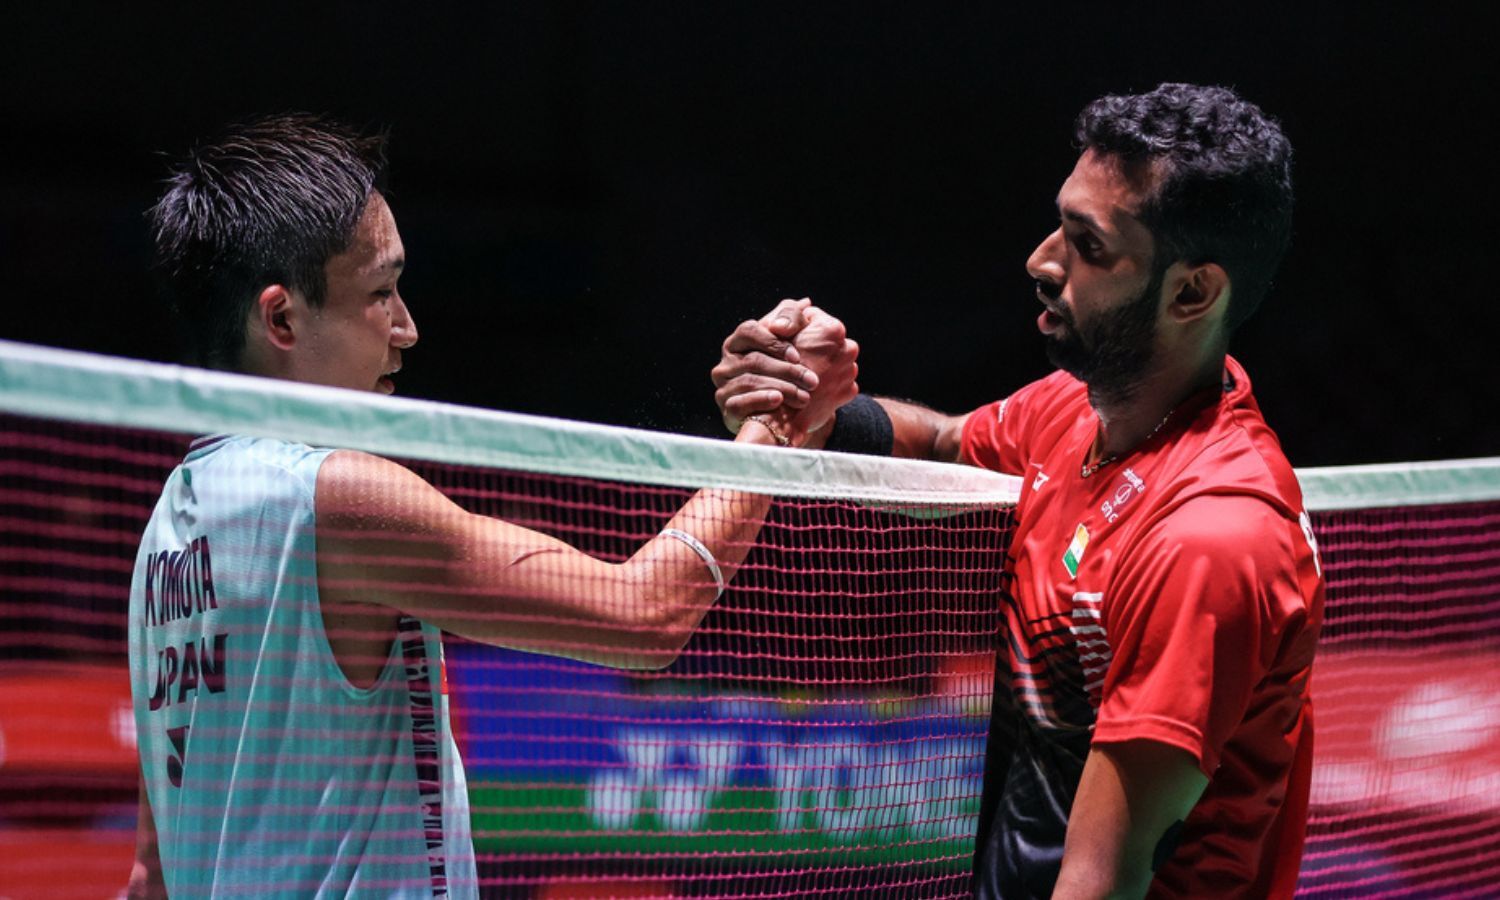 You are currently viewing ‘Wasn’t expecting to win’ – HS Prannoy shocks 2-time World Champion Kento Momota at BWF World Championships